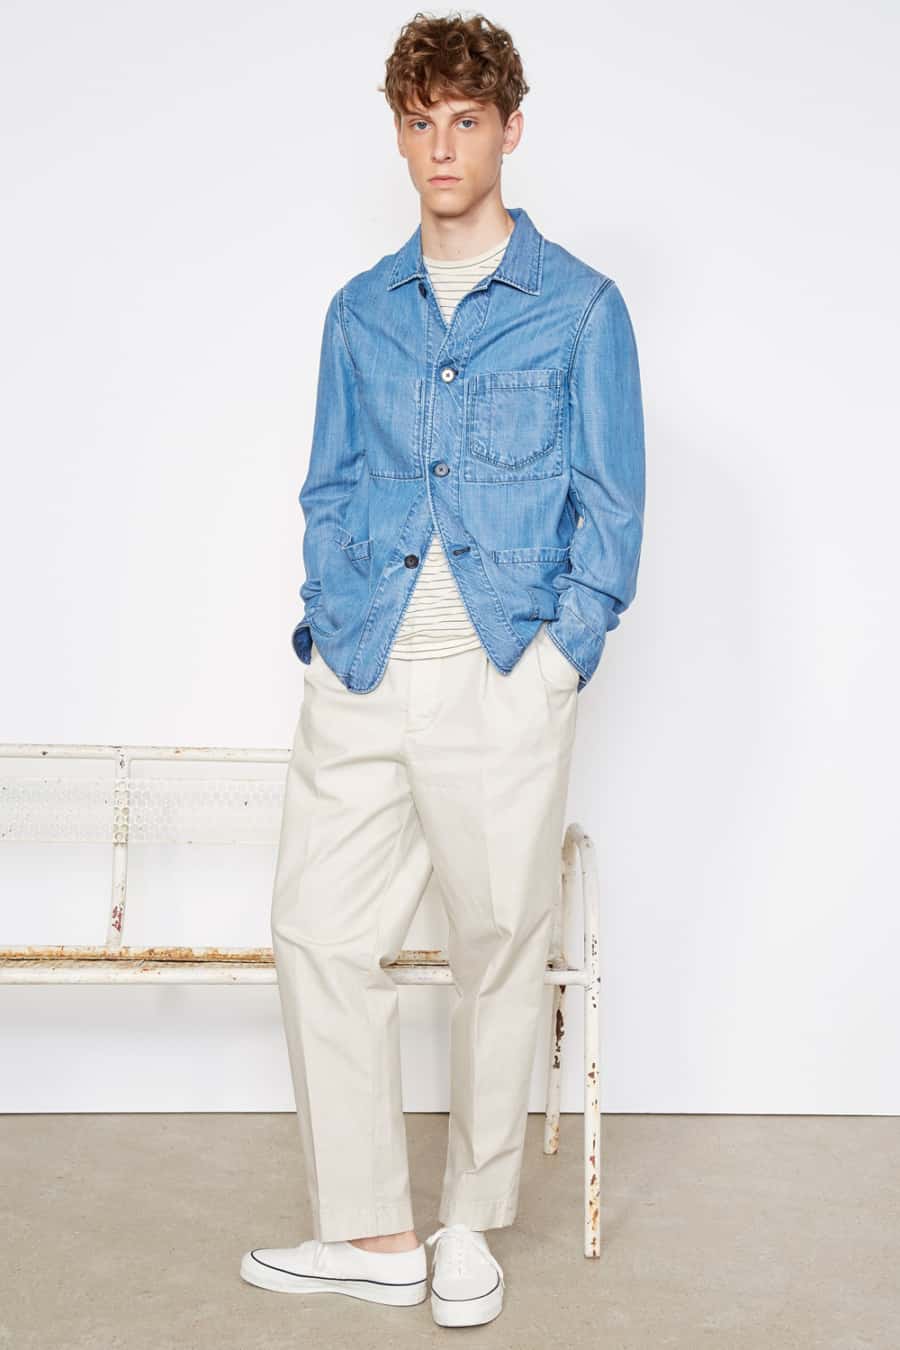 Men's mid blue denim work shirt, off-white trousers and white sneakers outfit